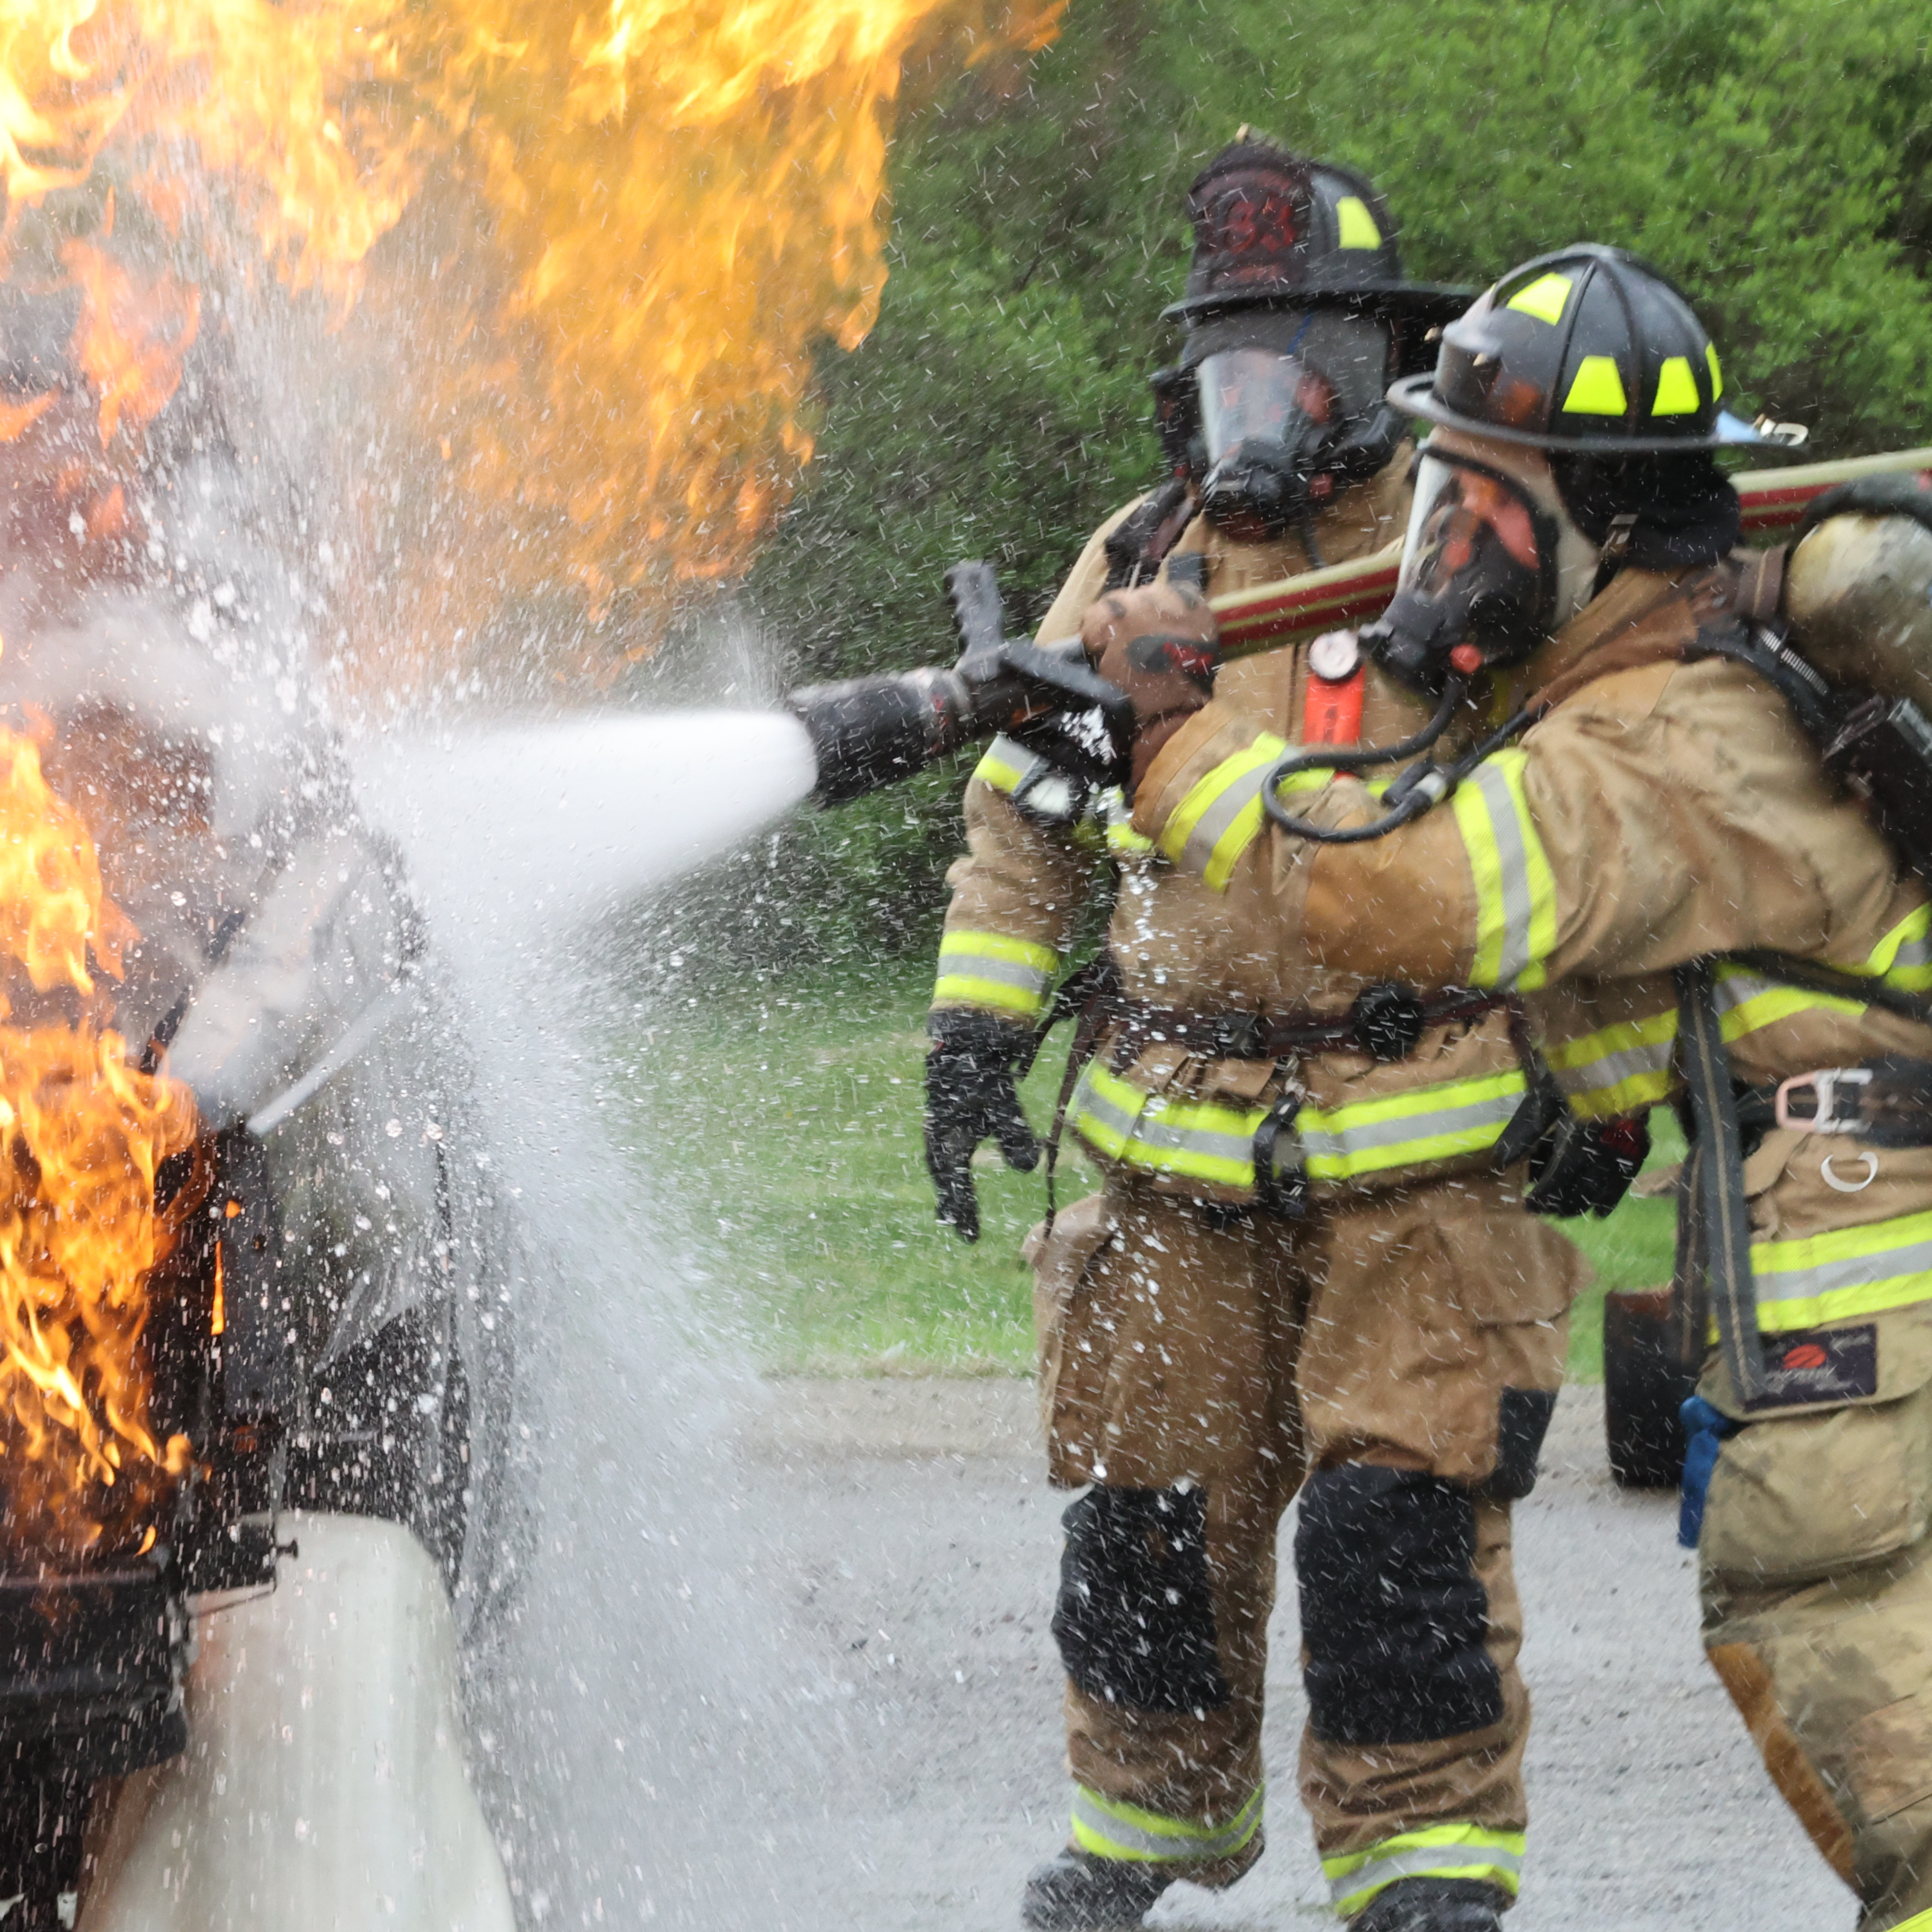 Firefighting students are holding a hose and spraying water on a car fire.